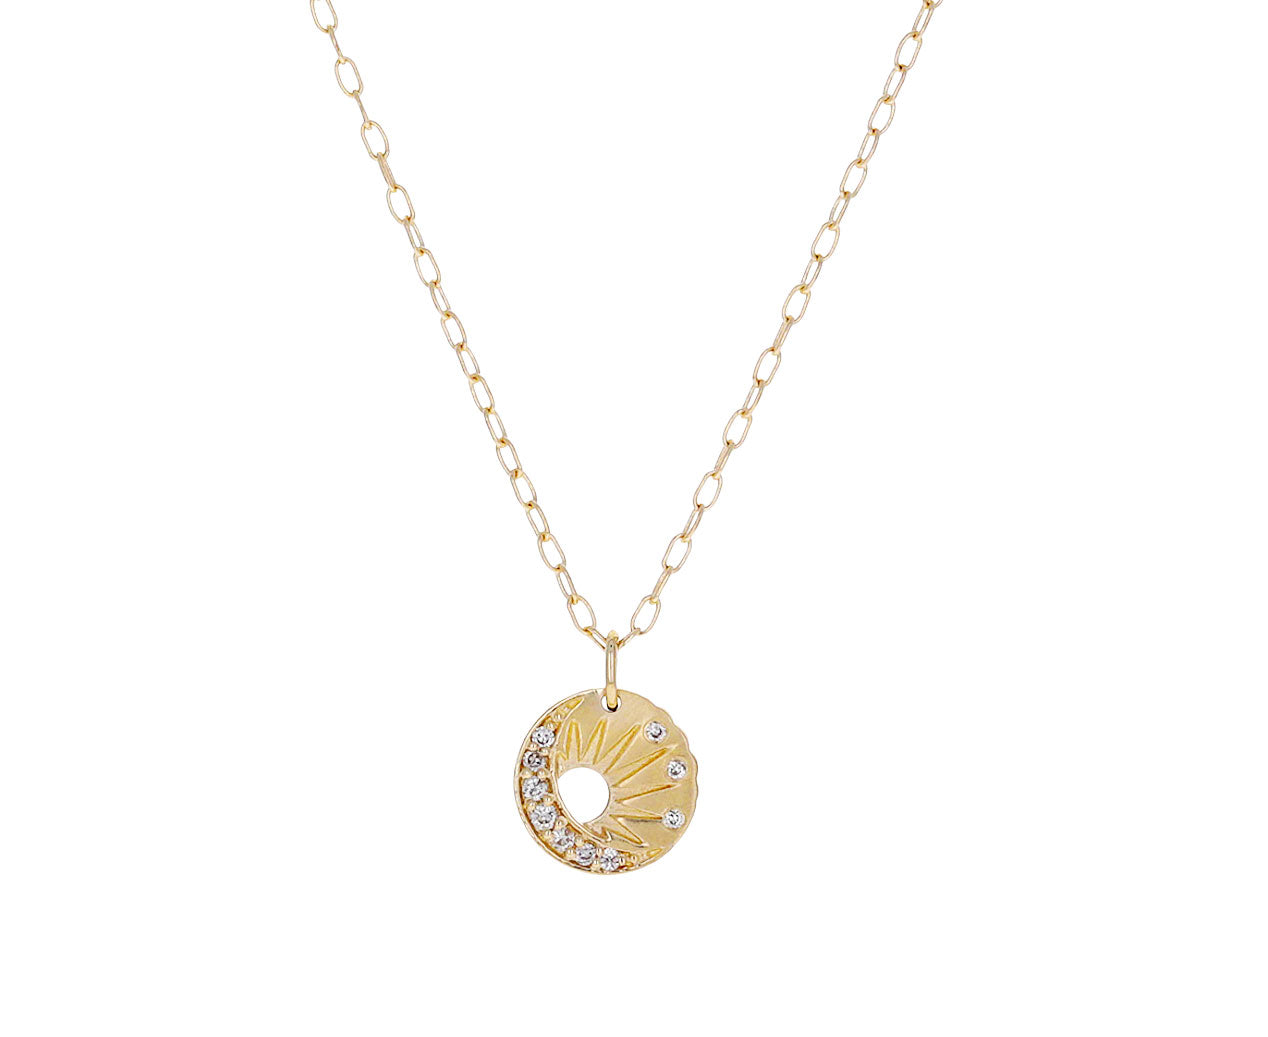 DWS 925 Sterling Silver 18k Flash Gold Plated Half Moon Pendant Necklace,  Size: 37 X 11 mm at Rs 2940 in Jaipur